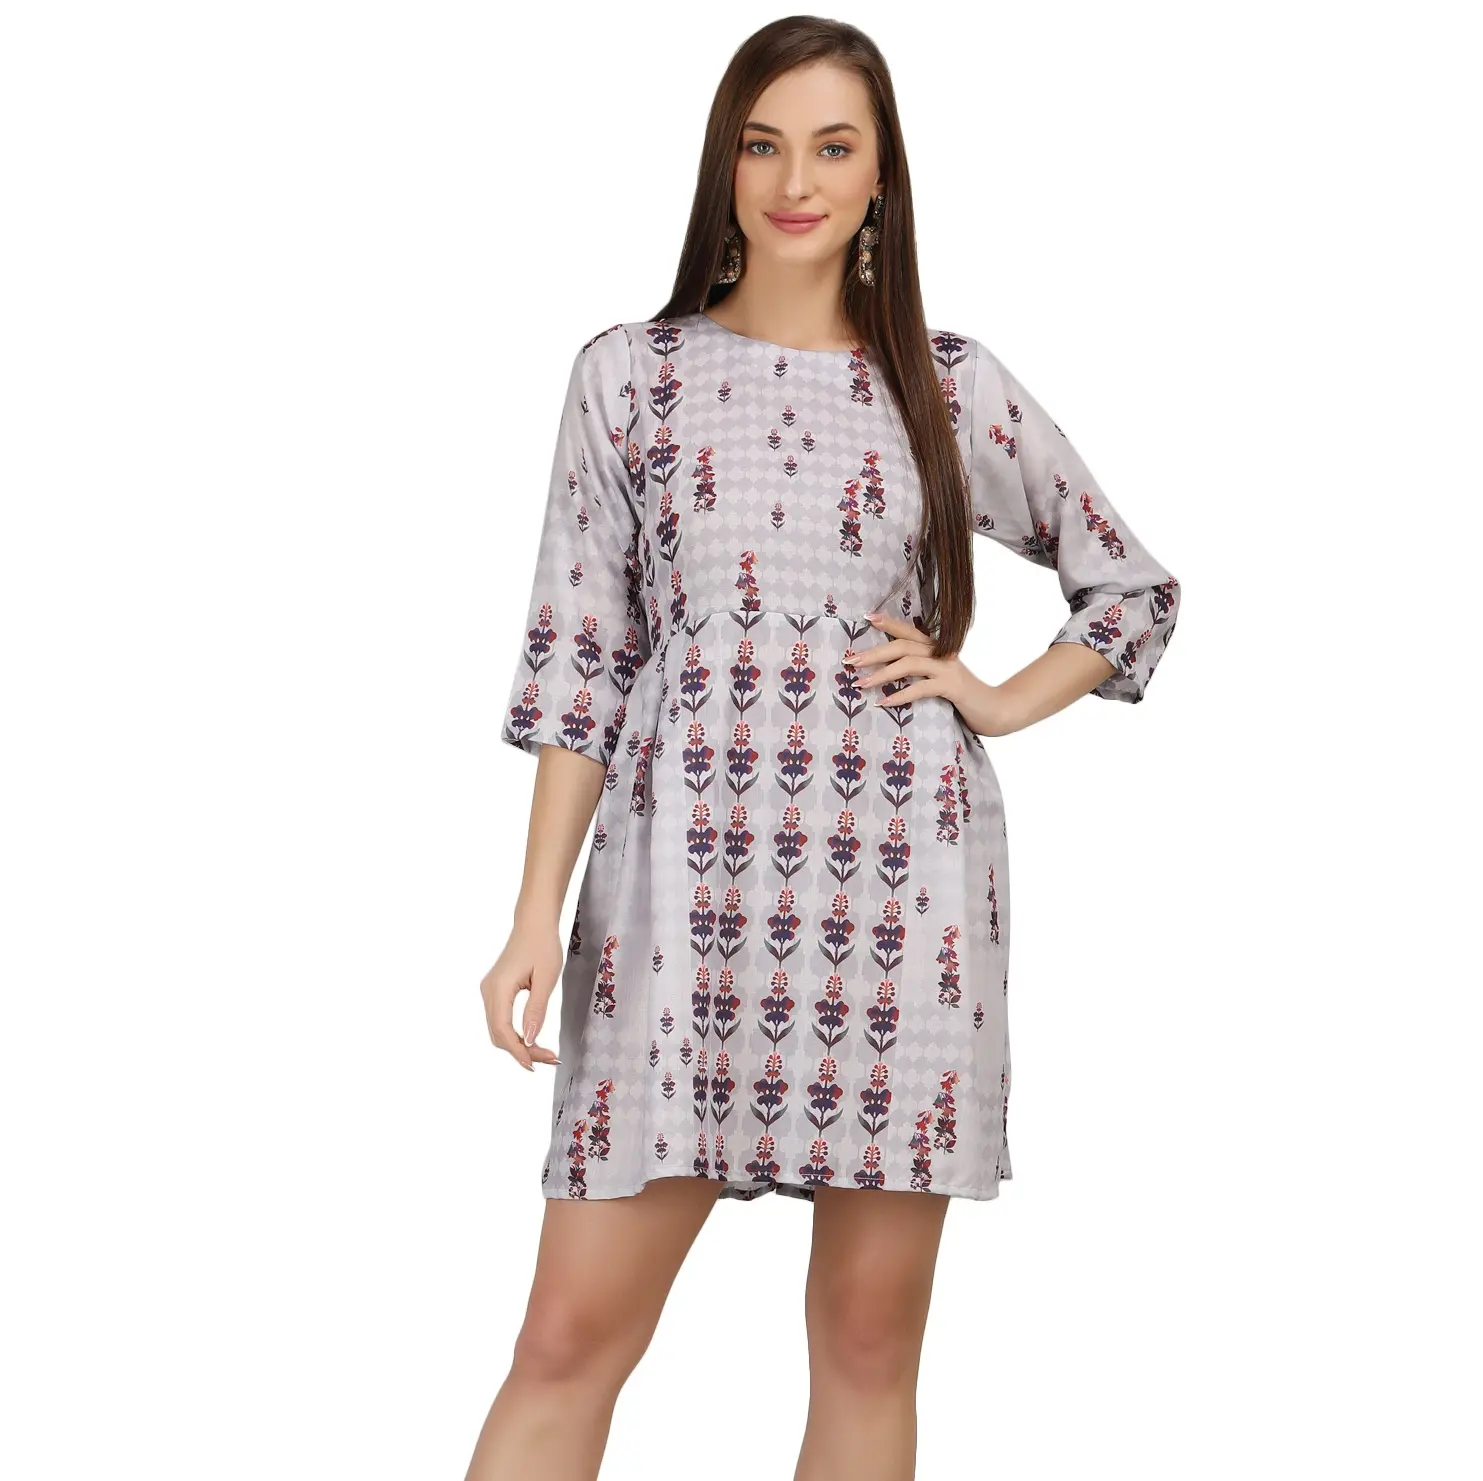 Stylish and Chic Tunic Dress for Women Latest Collection Tops Elegant Round Neck Regular Sleeve Summer Autumn Floral Print Tunic